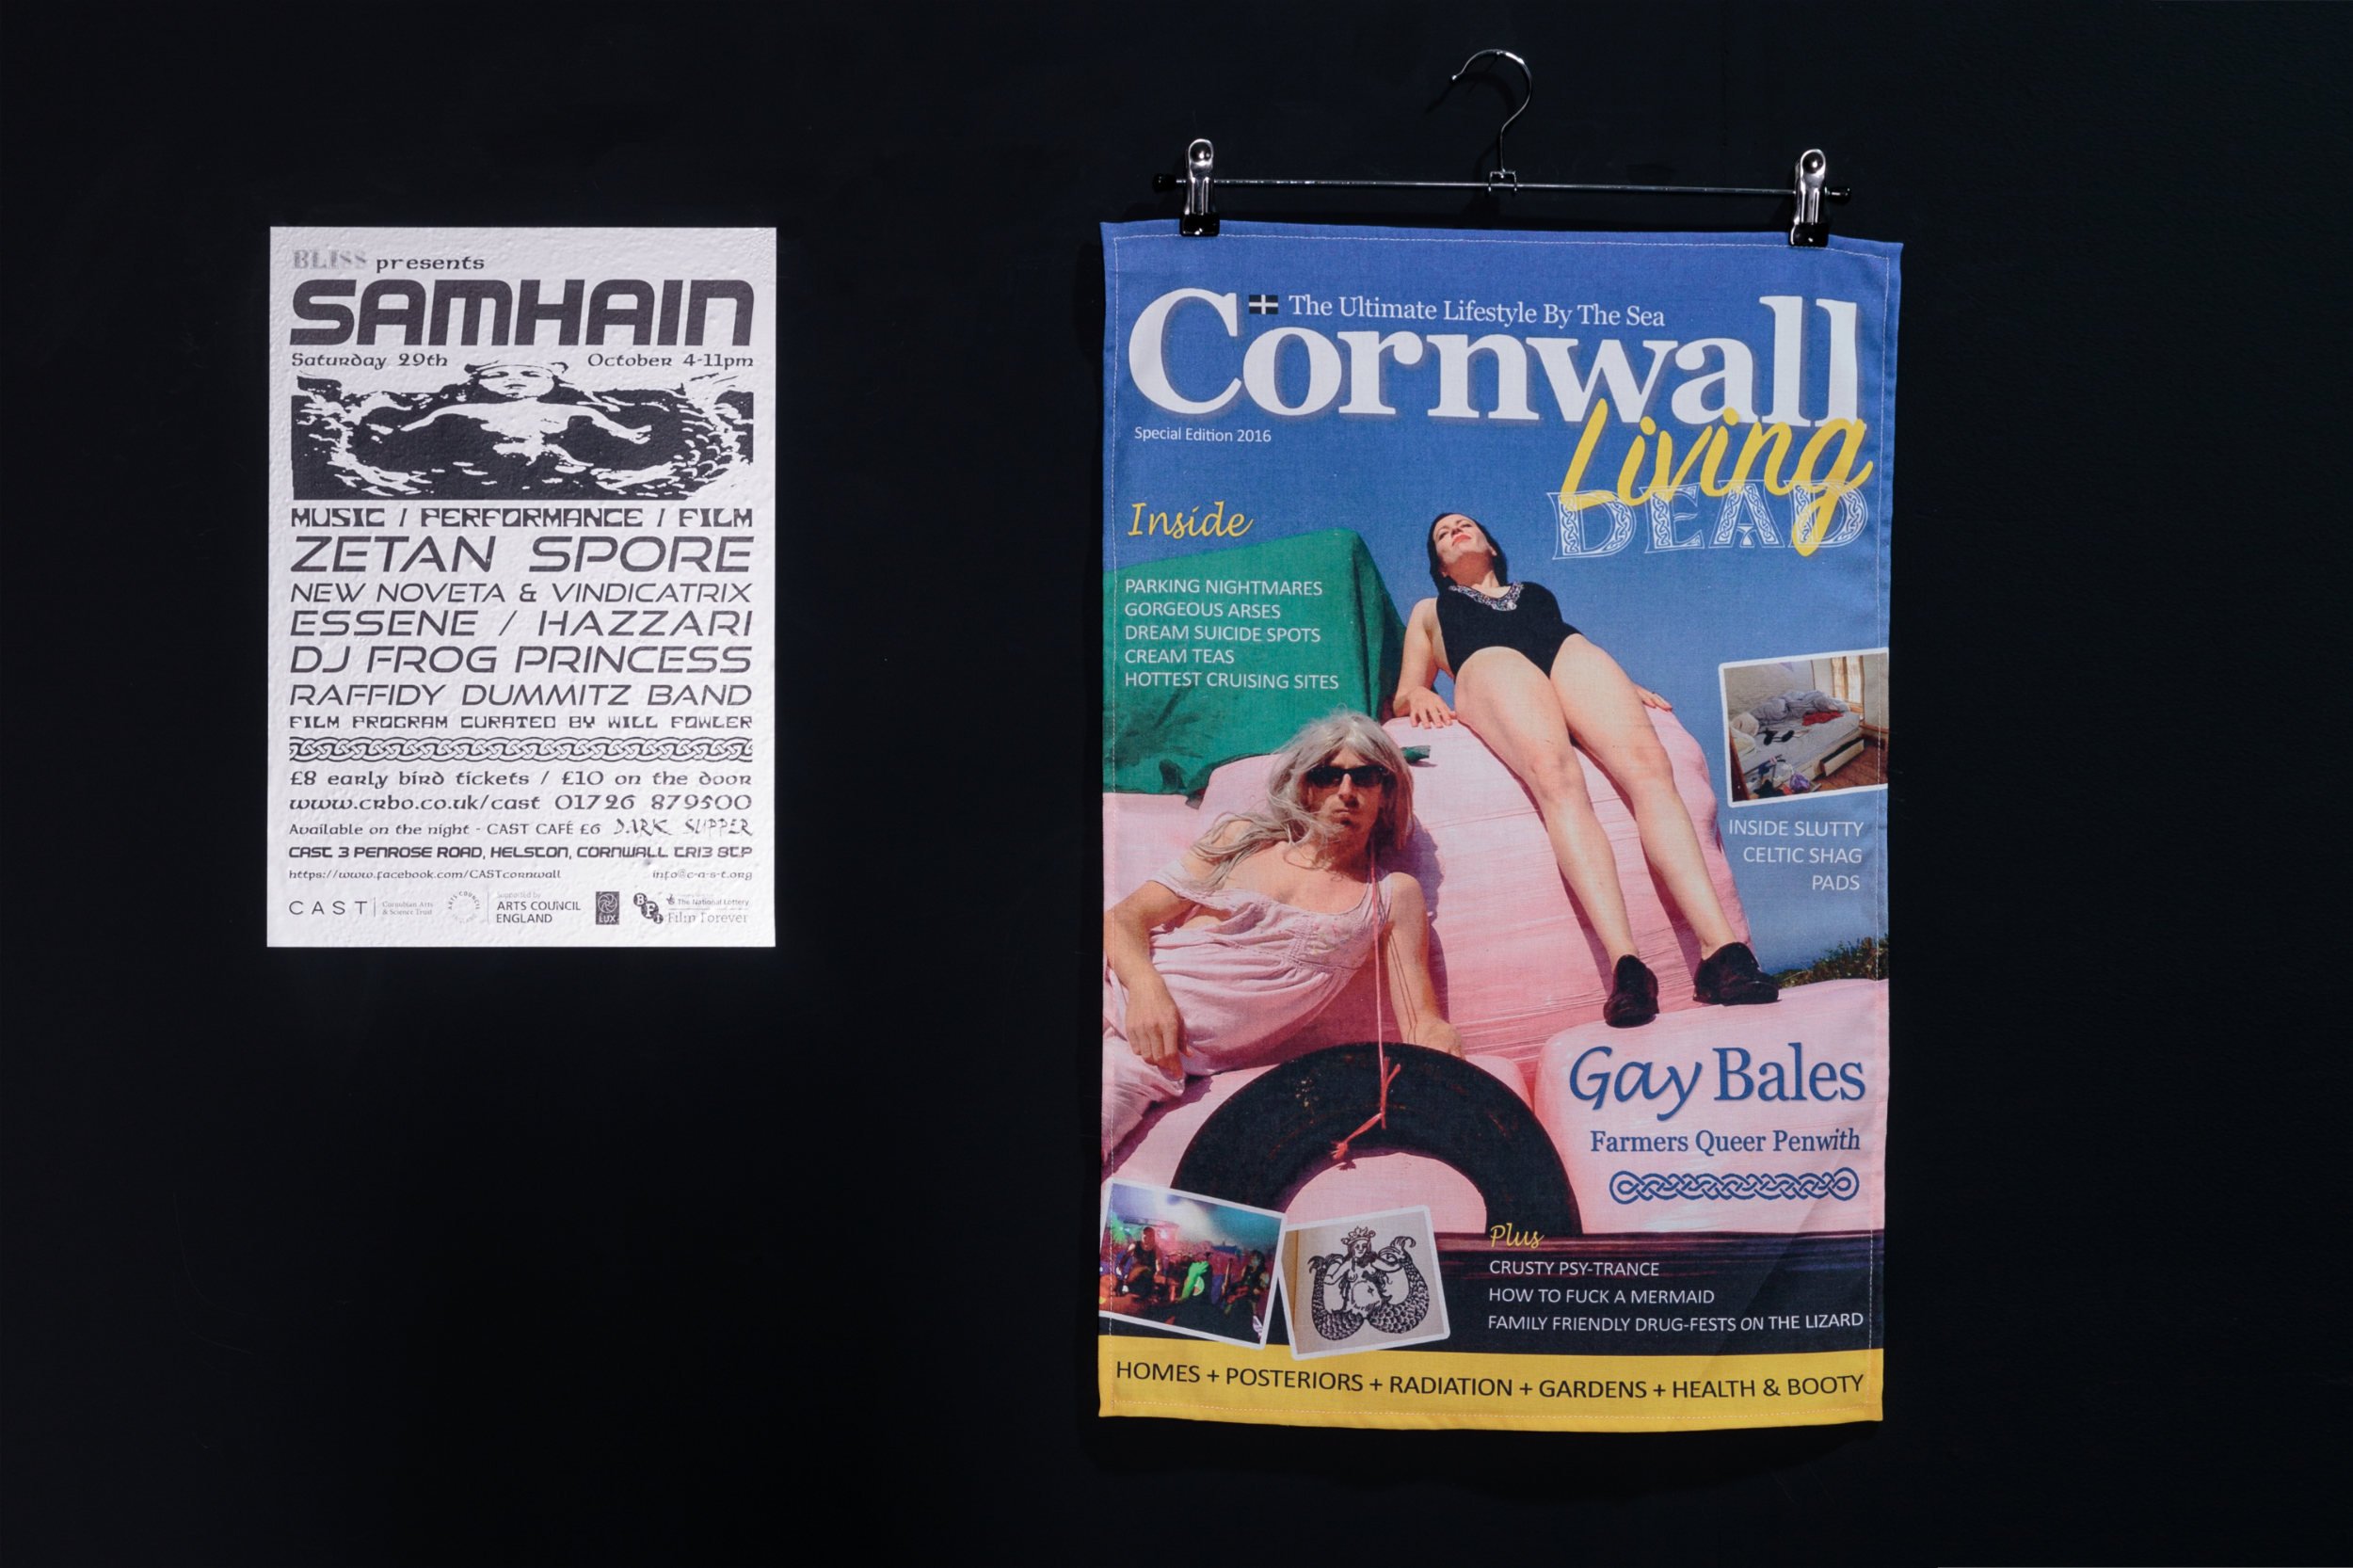  Left:  SAMHAIN ,&nbsp;poster design for event at CAST, cornwall; Right:   Cornwall Living Dead , tea towel, 71 x 46 cm approx., produced by Artist Tea Towel Company 